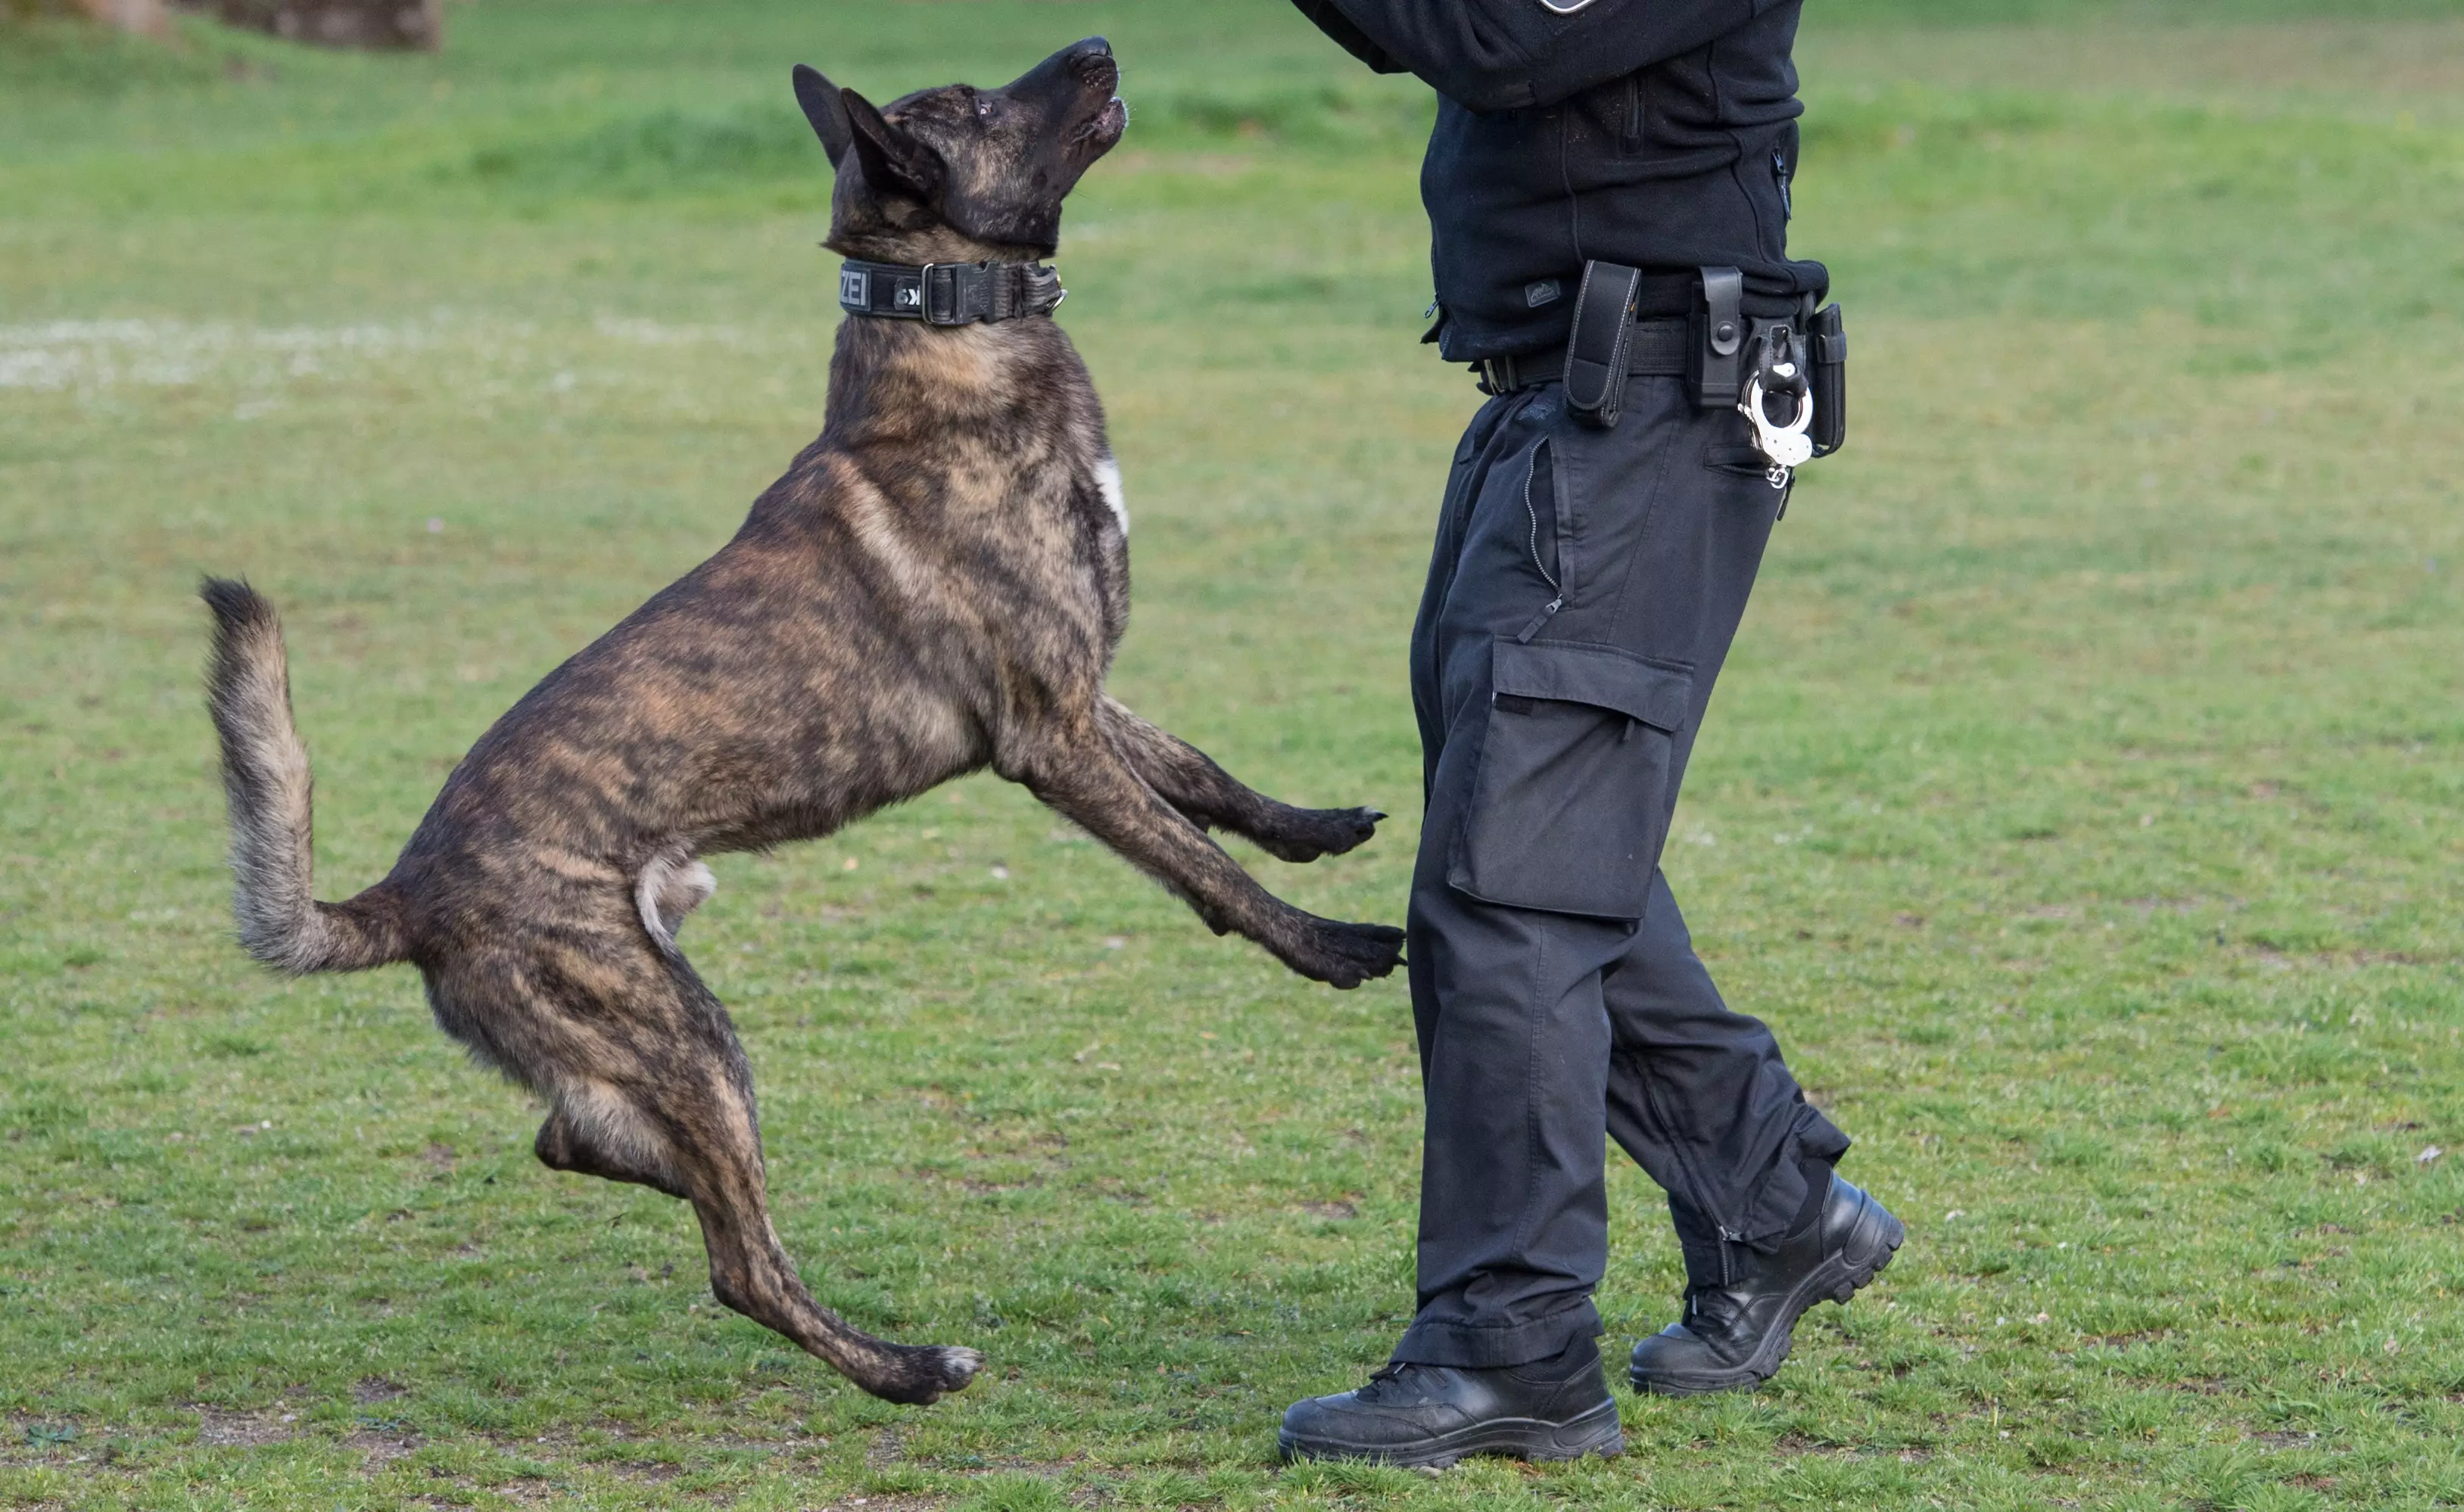 A modern police officer trains a bomb detection dog.